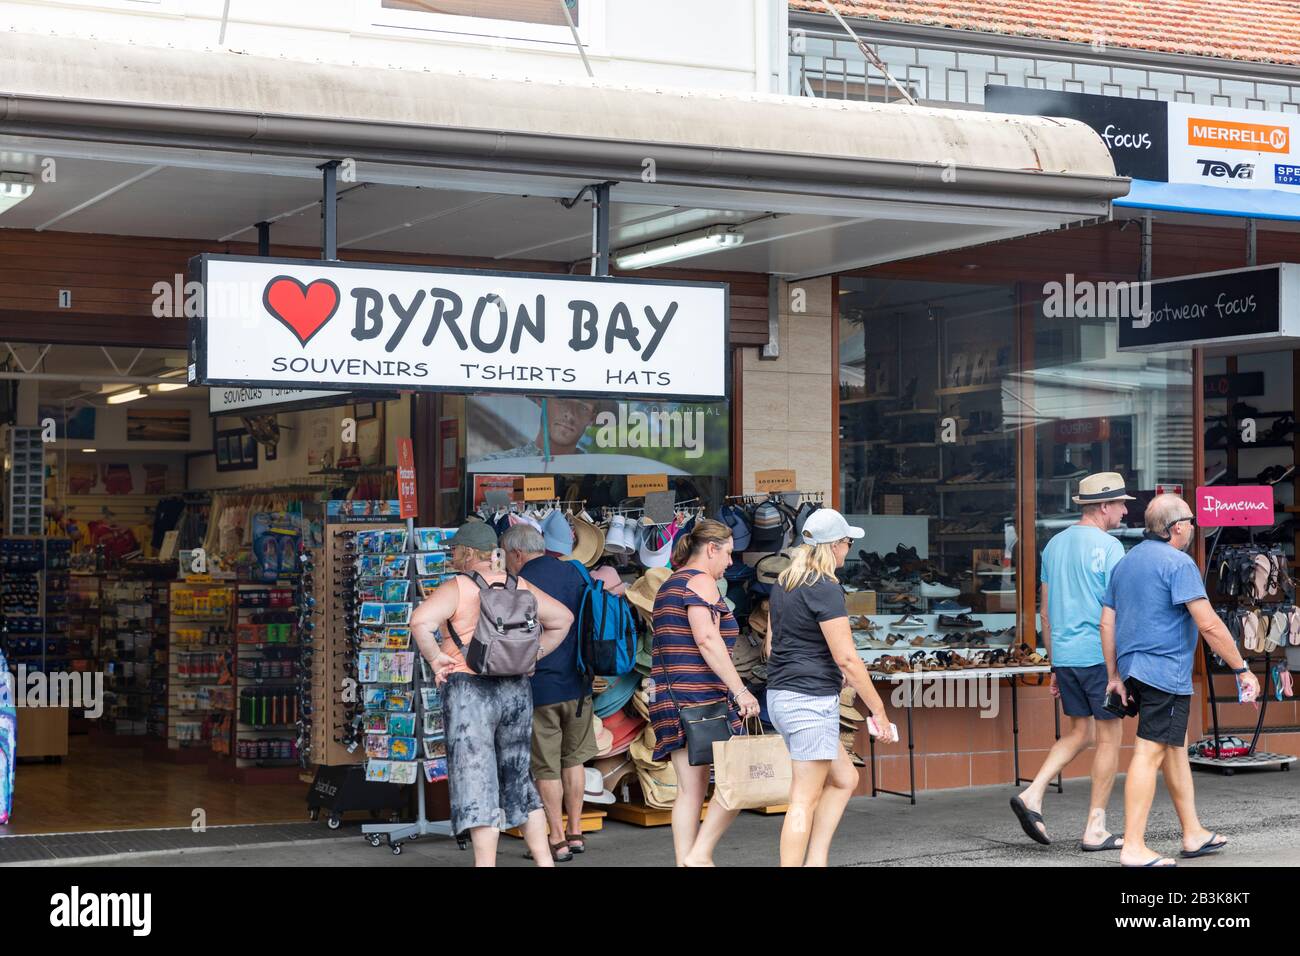 Byron Bay town centre and high street shops, New South Wales, Australia Stock Photo